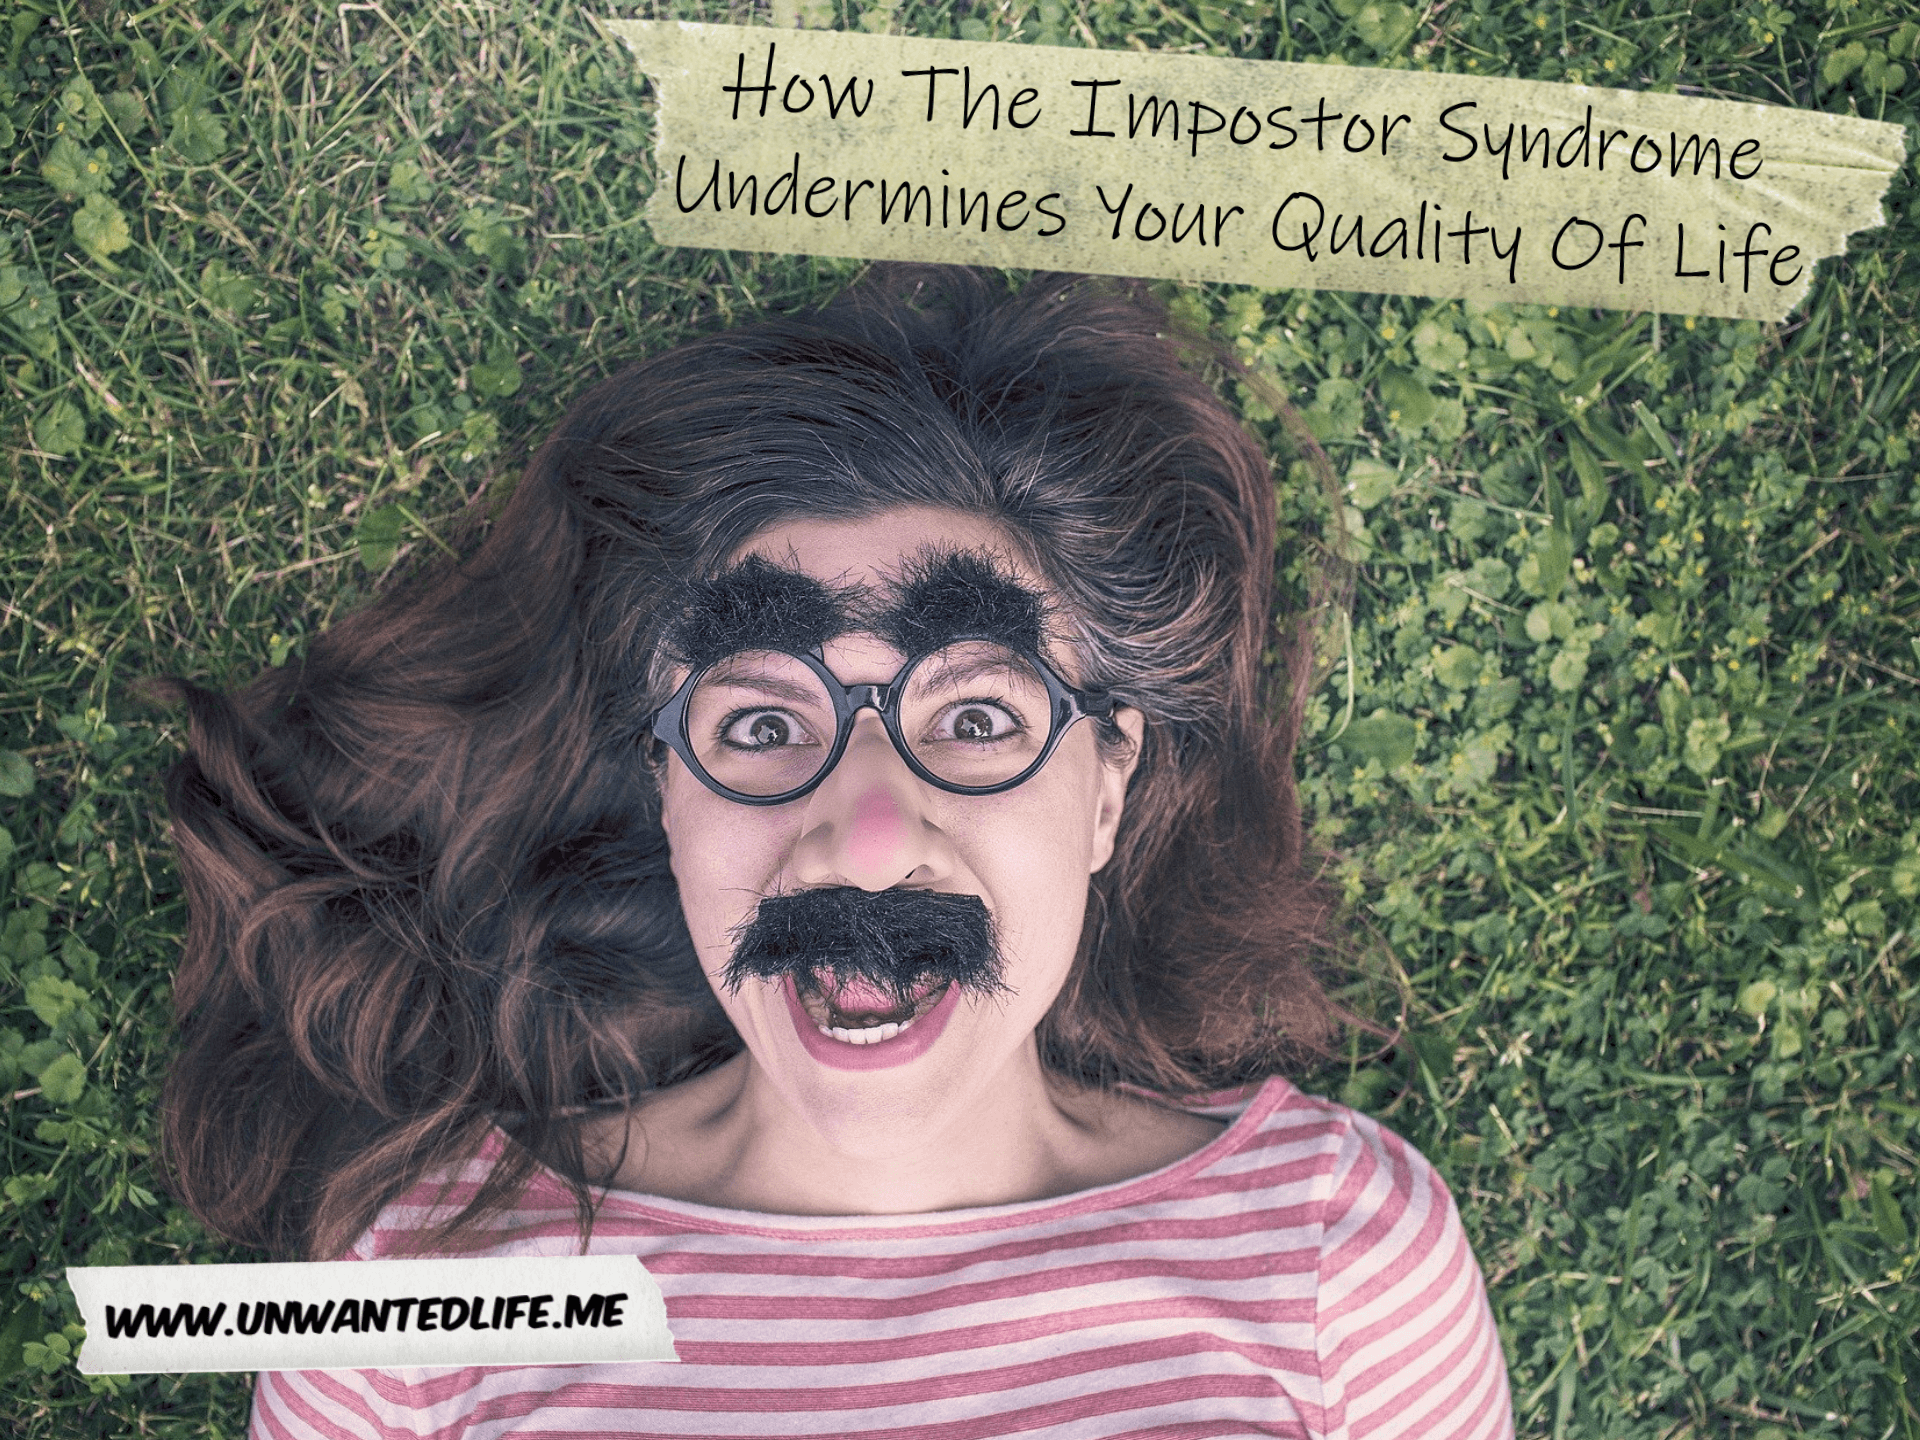 A photo of a white woman laying on the grass with a wide mouth expressed hidden by a cheap comical joke glasses with bushy eyebrows and moustache to represent the topic of the article - How The Impostor Syndrome Undermines Your Quality Of Life